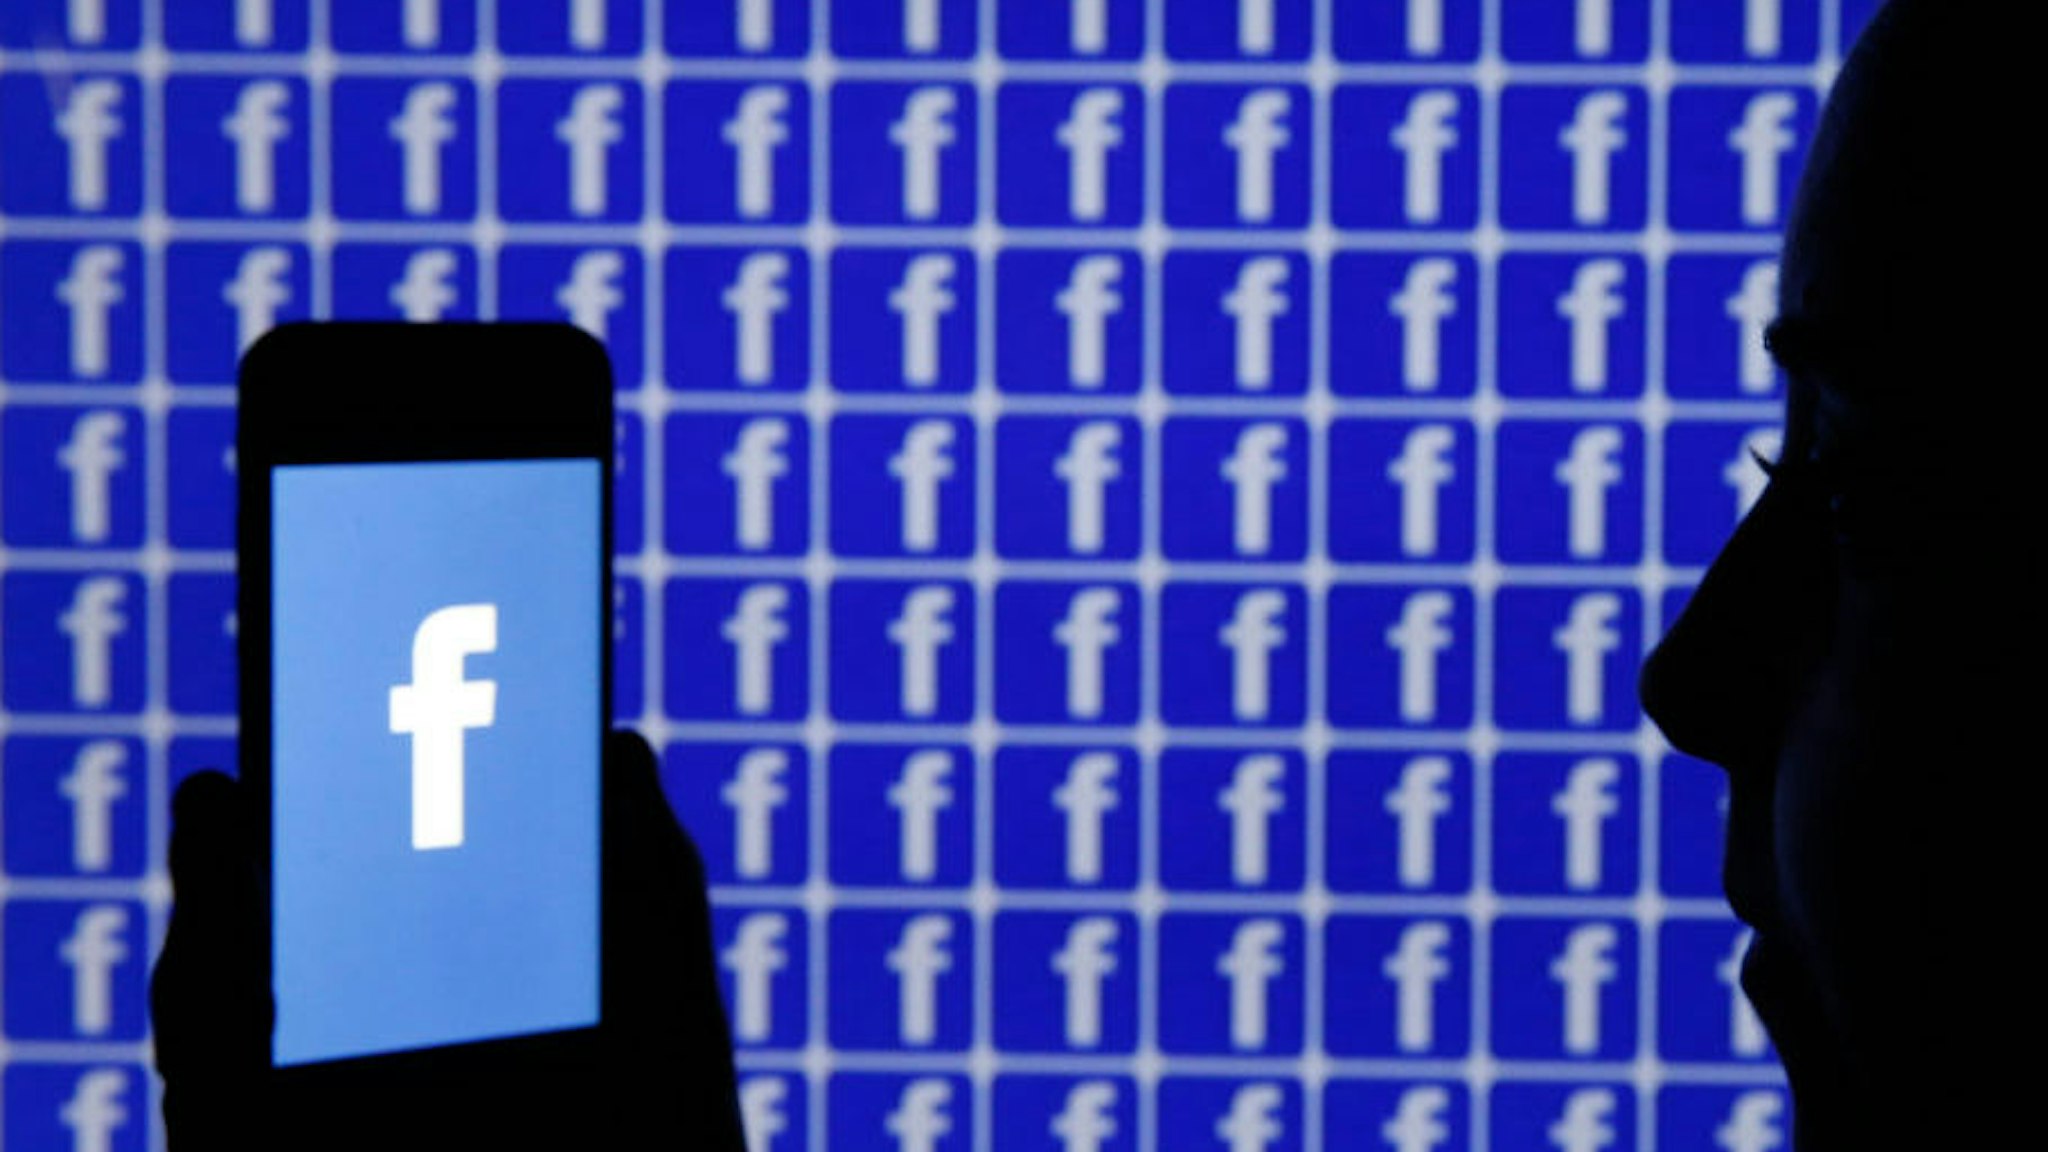 In this photo illustration, the Facebook logo is displayed on the screen of an iPhone in front of a TV screen displaying the Facebook logo on December 26, 2019 in Paris, France. The American company Facebook created in 2004 by Mark Zuckerberg builds technologies that give people the power to connect with friends and family, find communities and grow businesses. (Photo by Chesnot/Getty Images)